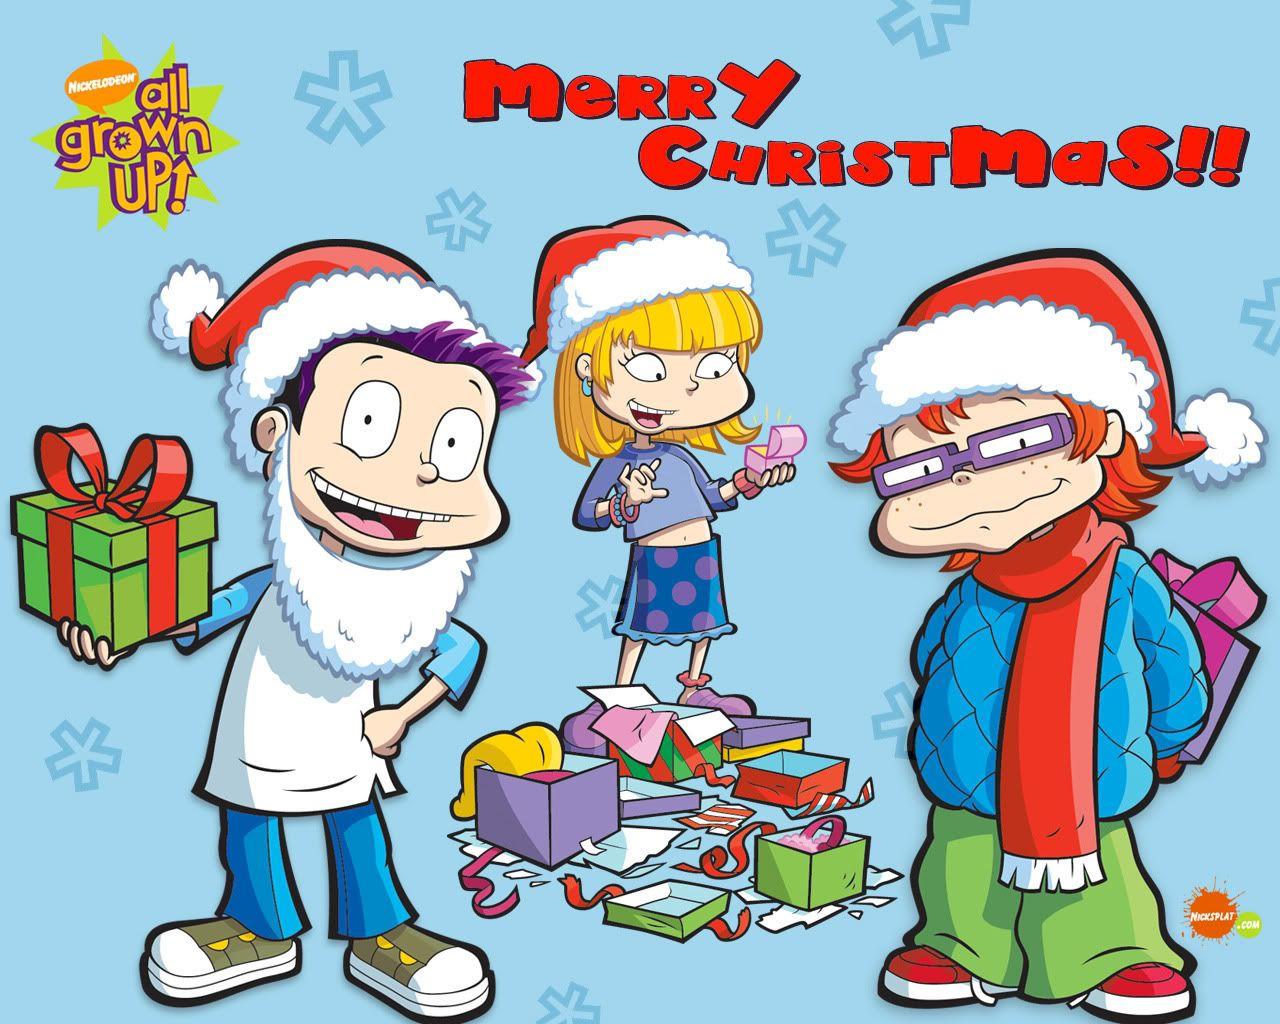 Rugrats: All Grown Up image Rugrats All Grown Up Christmas HD